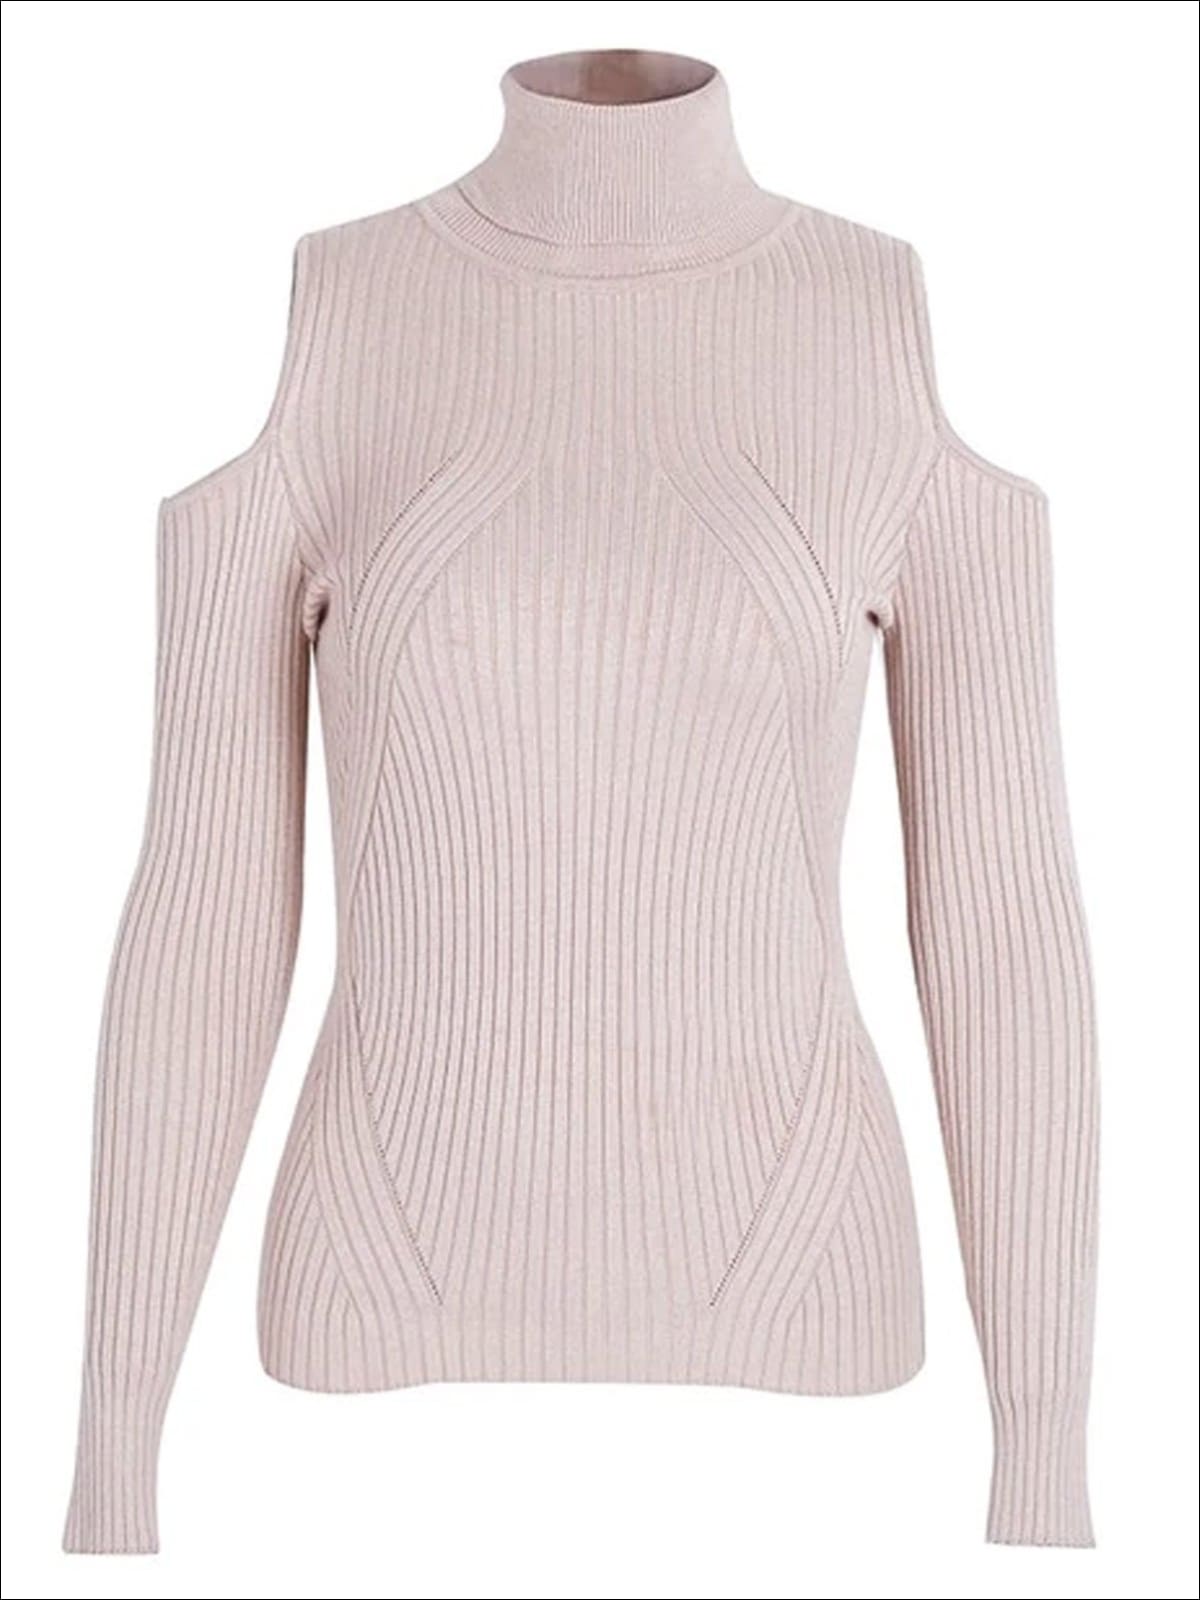 Womens Fall Cozy Knitted Cold Shoulder Sweater - Pink / S/M - Womens Fall Sweaters